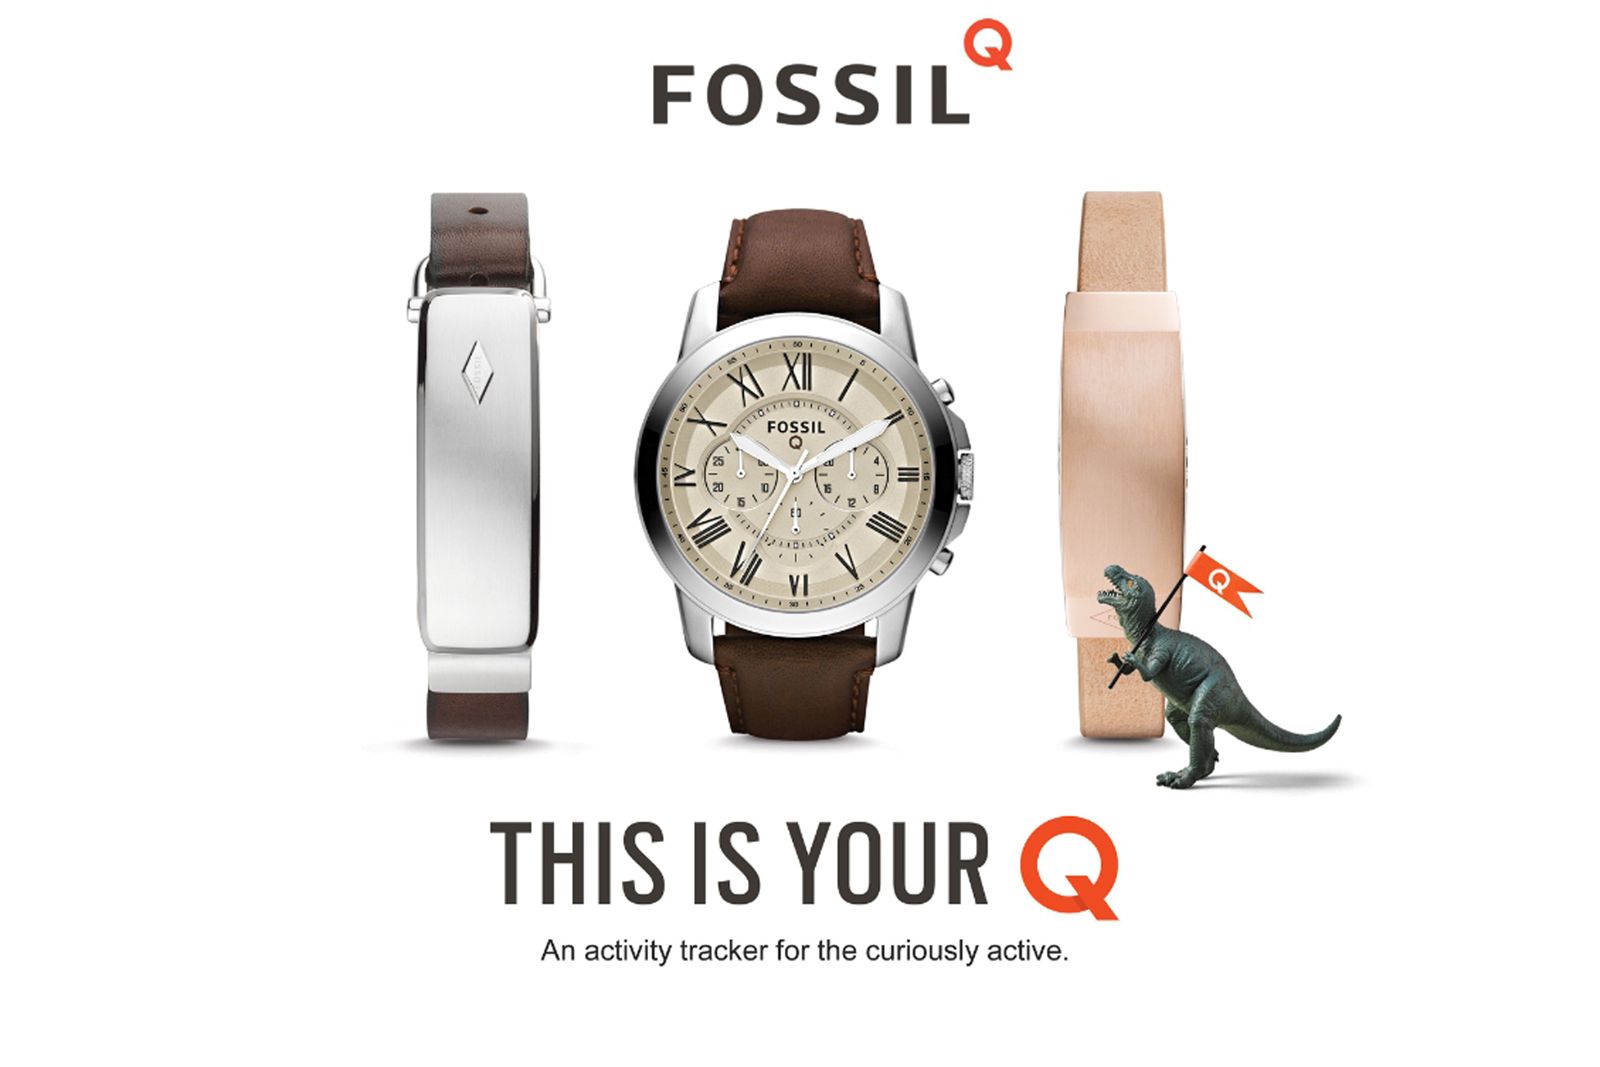 fossil details q family of connected accessories including q founder android wear watch image 1